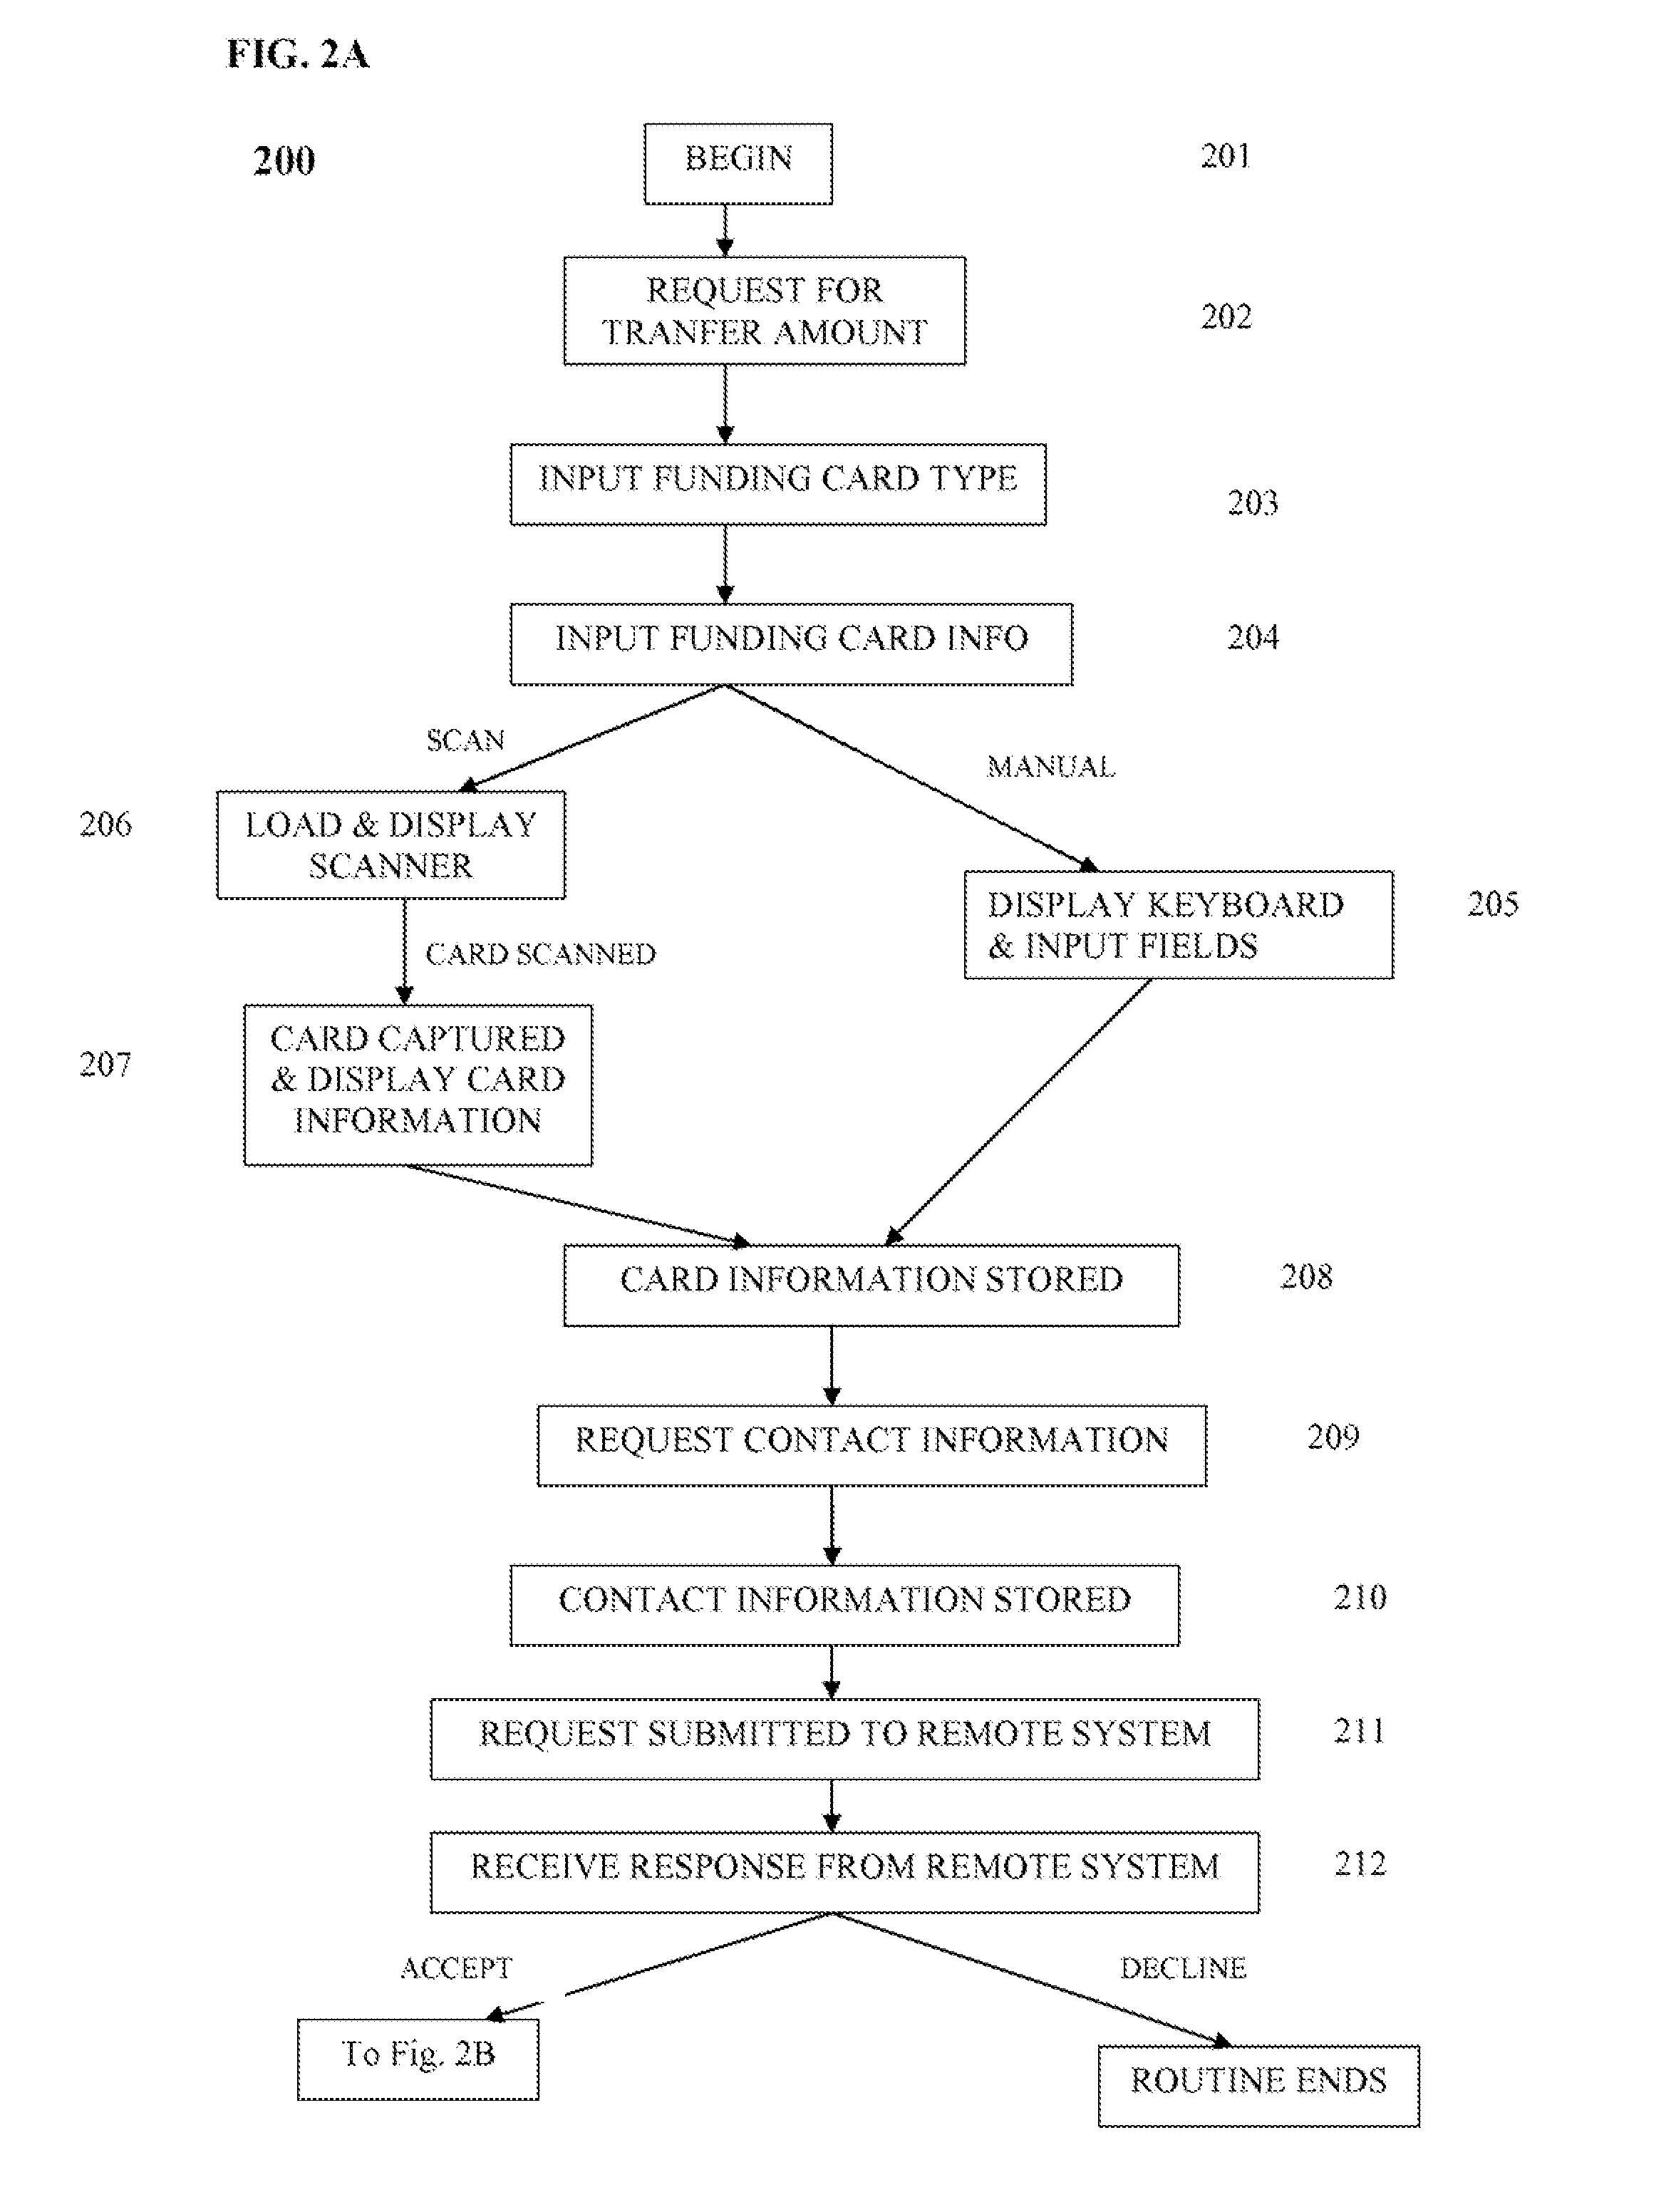 Systems and Methods for Managing Prepaid Cards in a Digital Wallet, including Transferring Value from Prepaid Cards and Managing User Selected Accounts